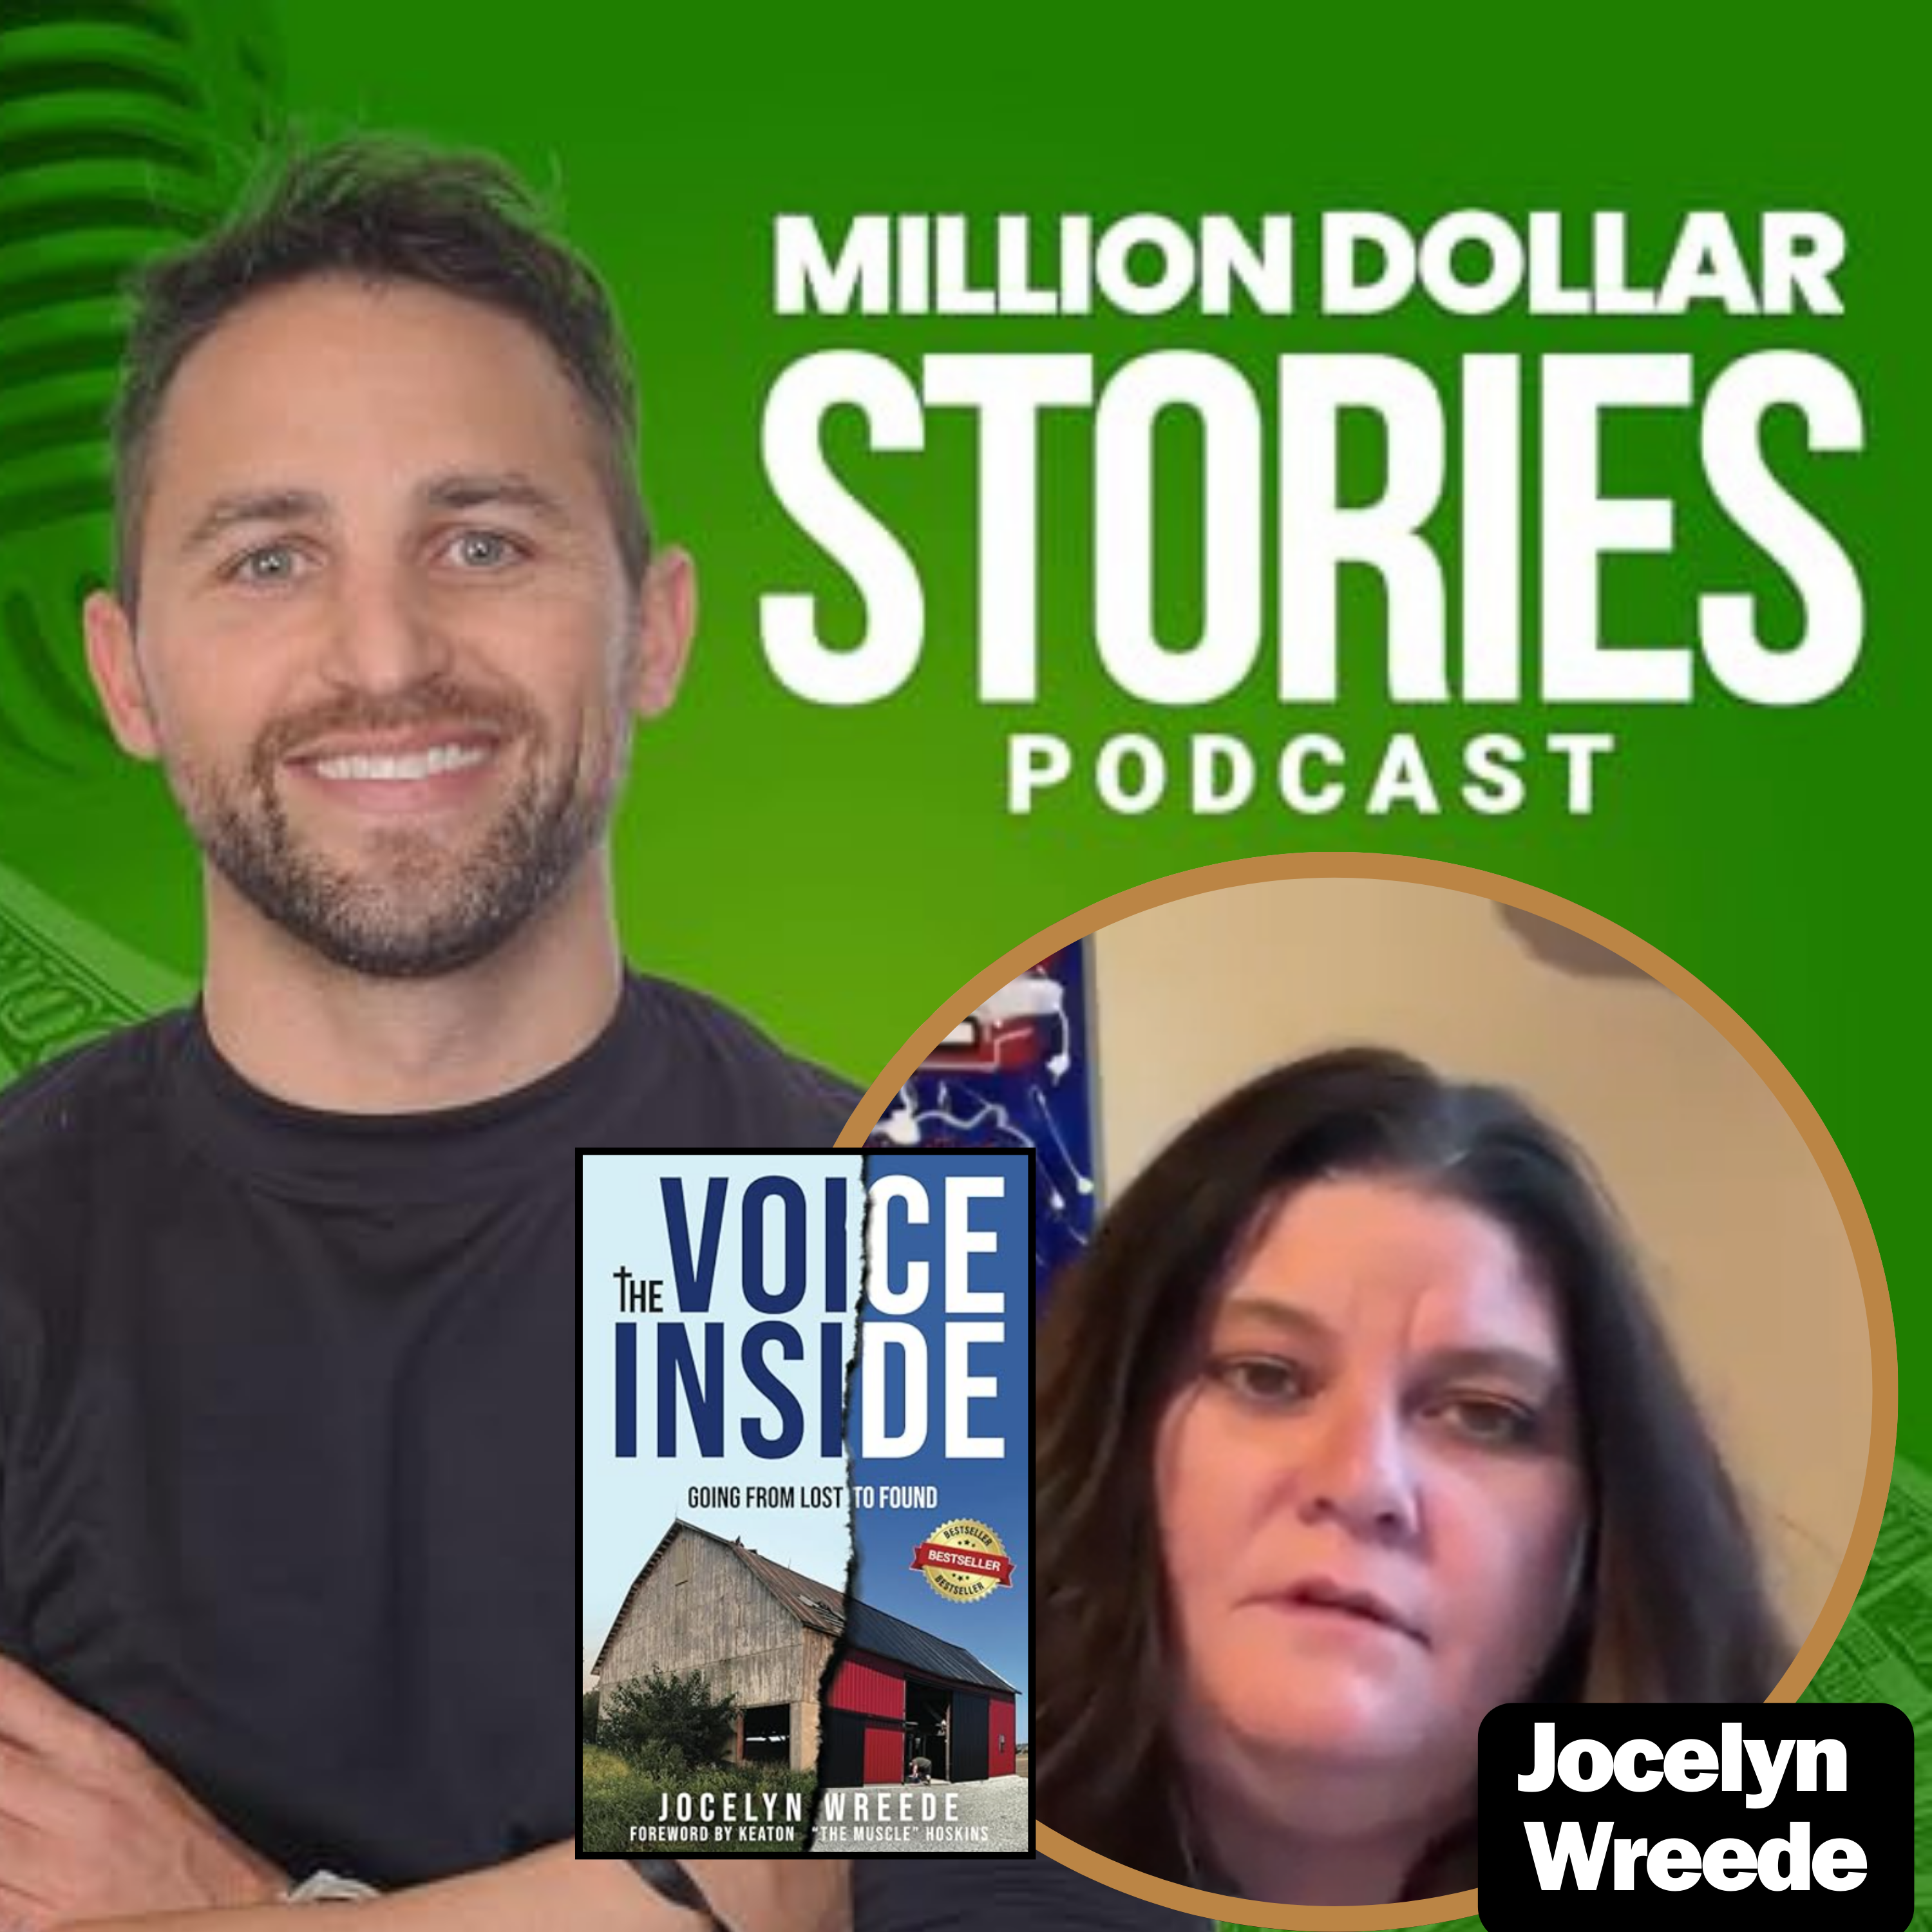 Jocelyn Wreede – Author of “The Voice Inside Going From Lost to Found”